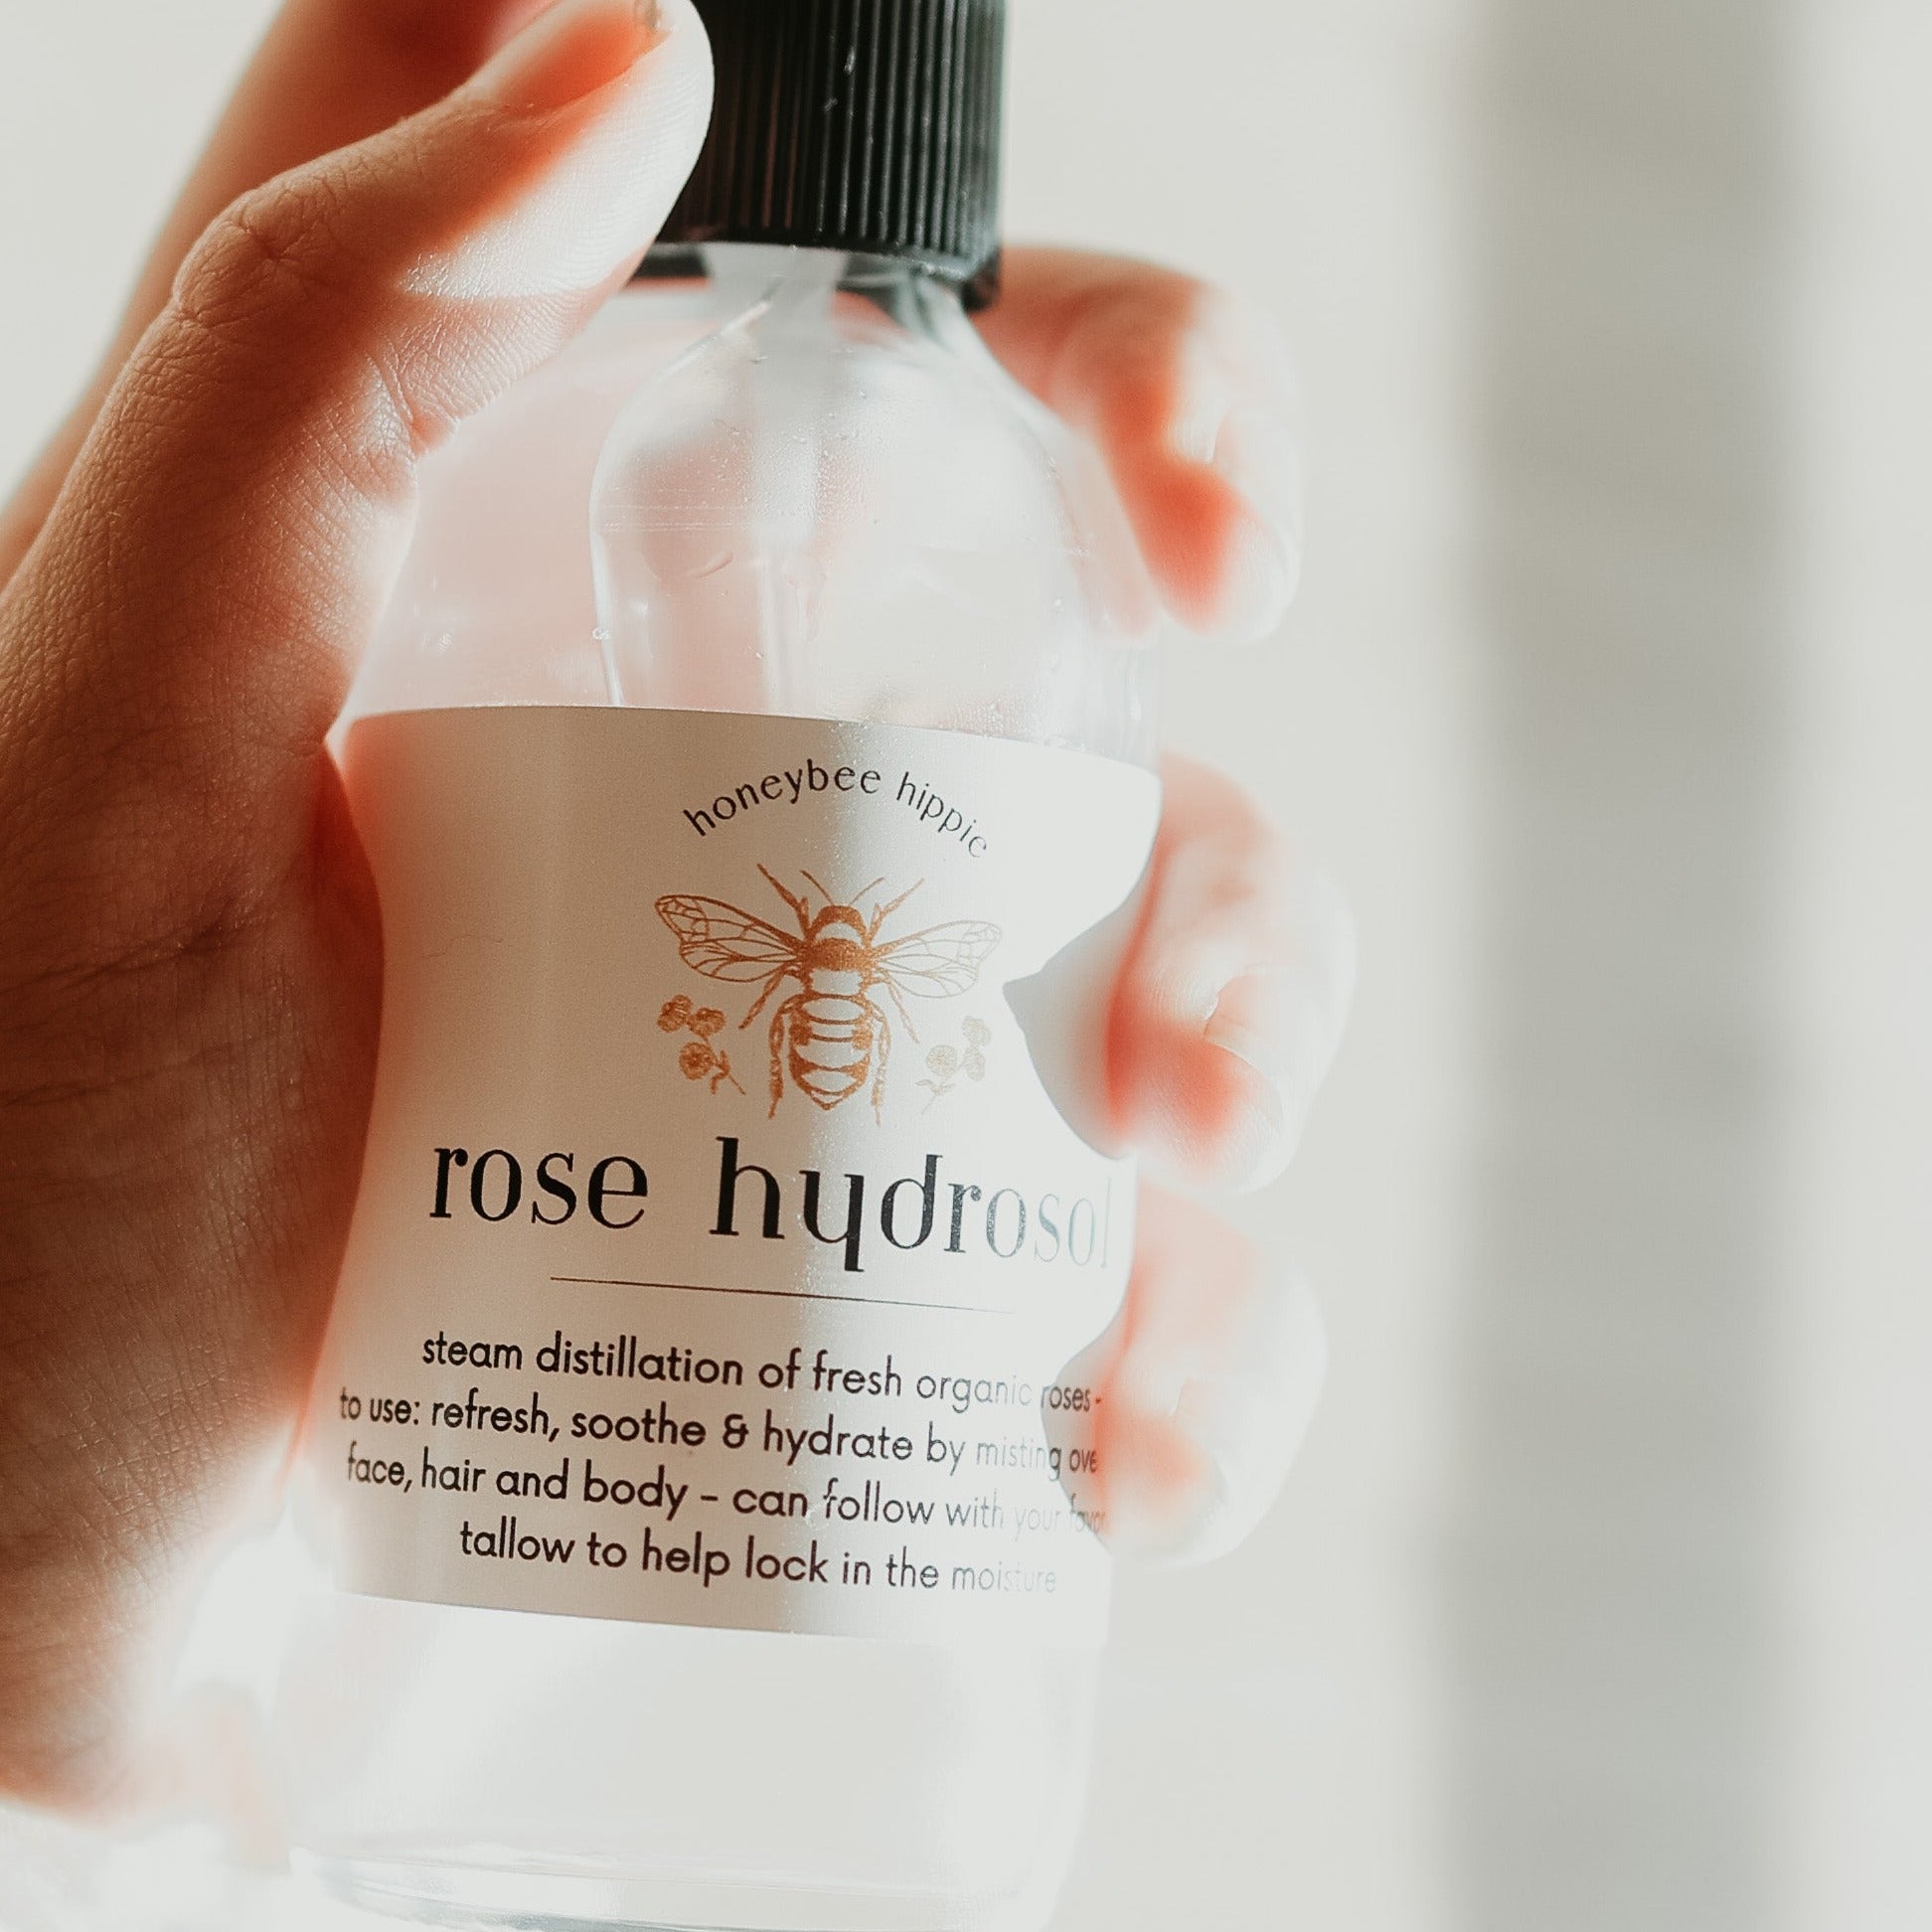 a close up of a bottle of rose hydrosol facial toner spray being held in someone's hand